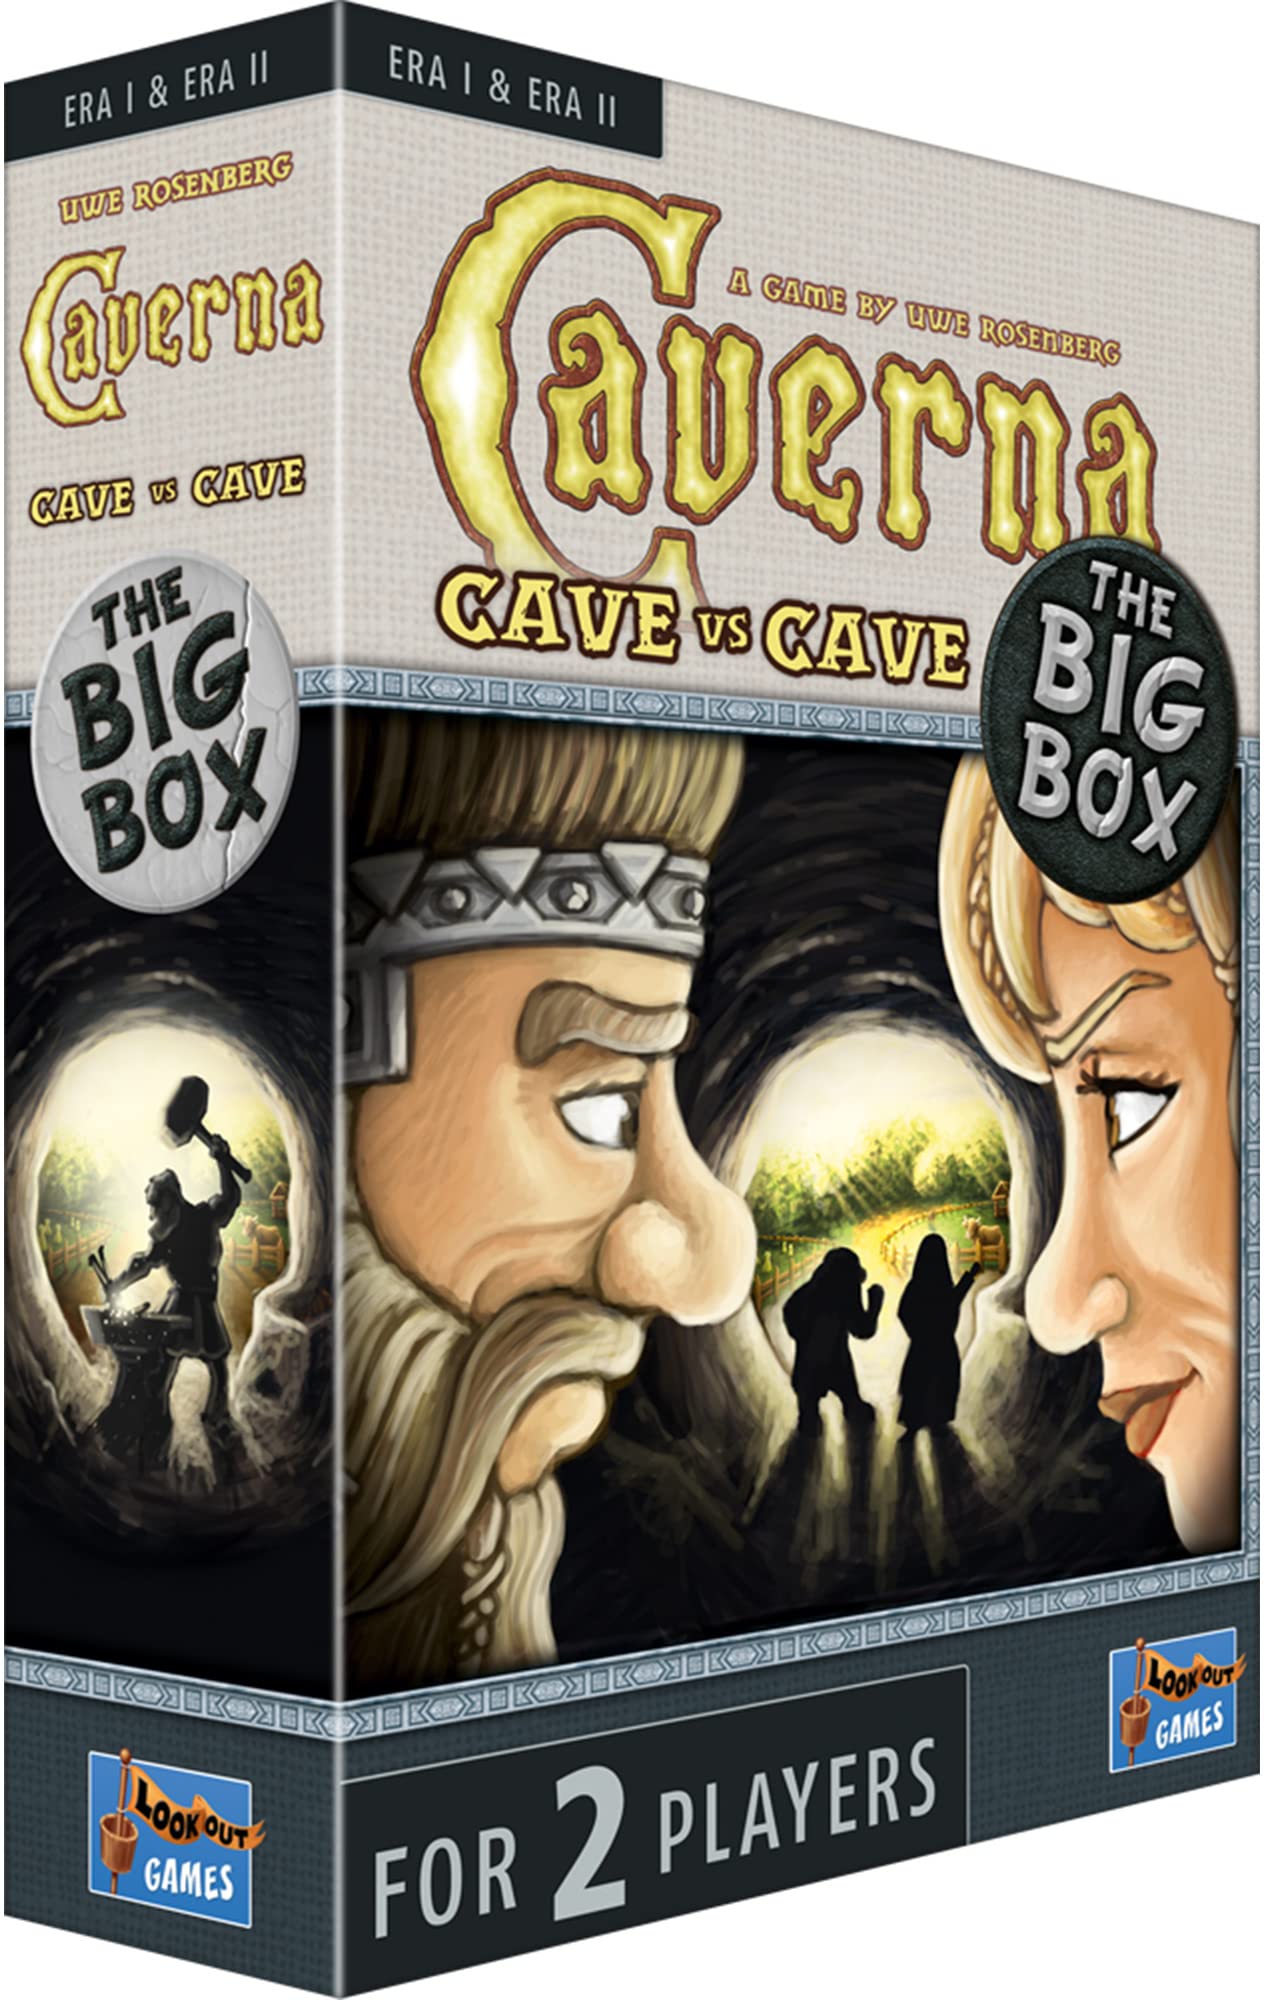 Lookout Spiele Caverna Cave vs. Cave The Big Box Board Game Cave Mining and Worker Placement Strategy Game Ages 12+ 2 Players Average Playtime 20-40 Minutes Made by Lookout Games,Multicolor,LK0144